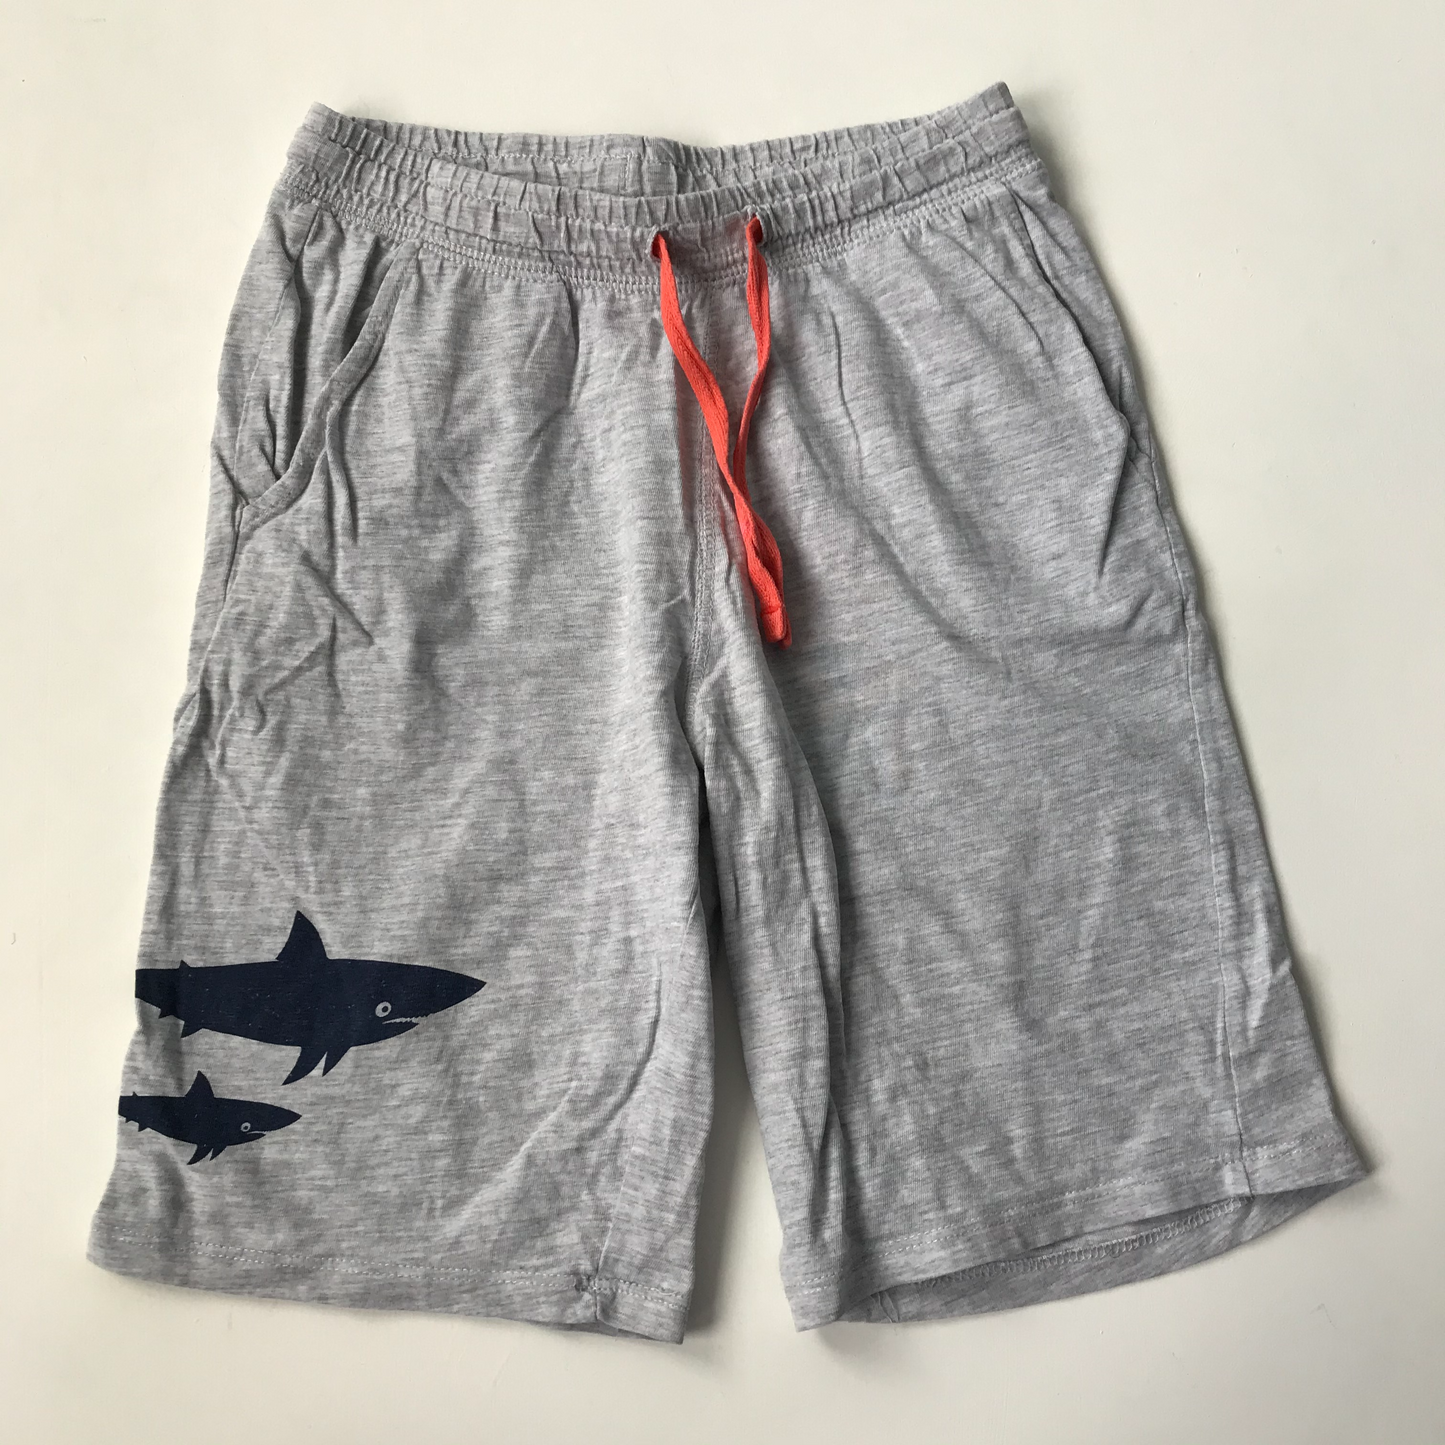 Shorts - Grey Jersey with Sharks - Age 8